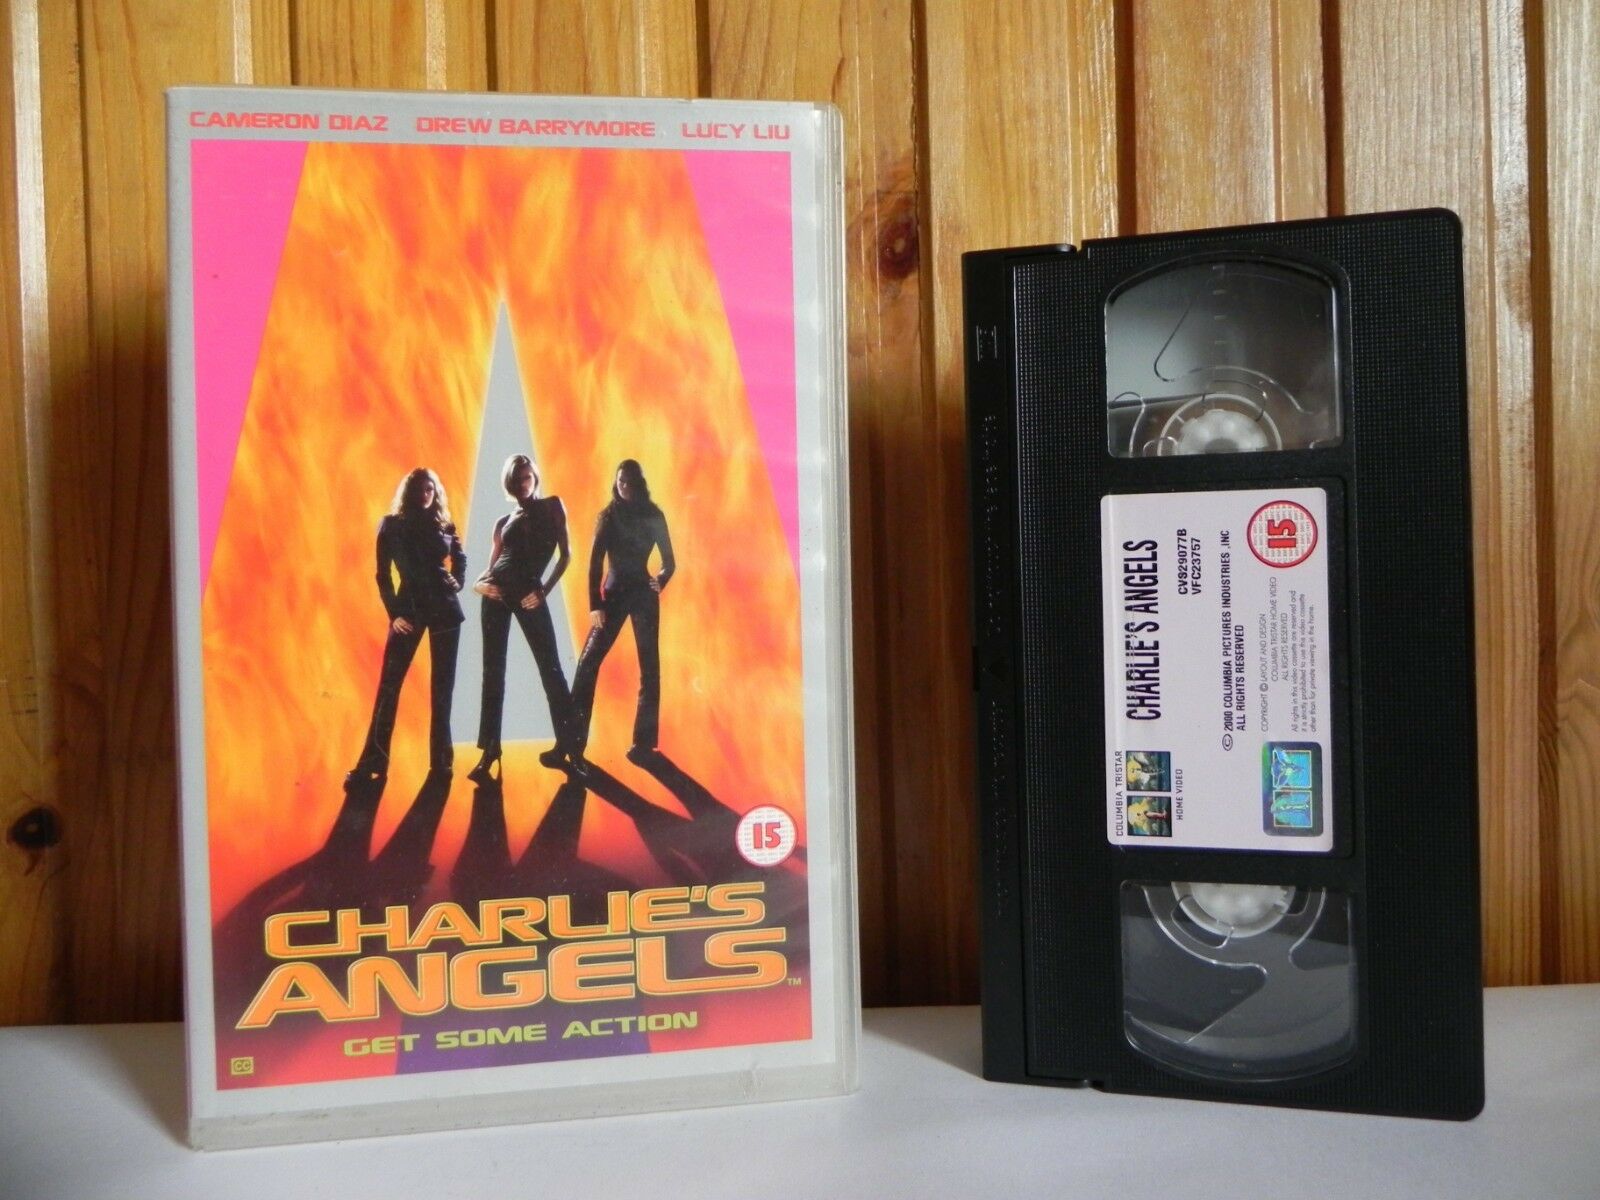 Charlie's Angels - Large Box - Columbia Tristar - Comedy - Ex-Rental - Pal VHS-